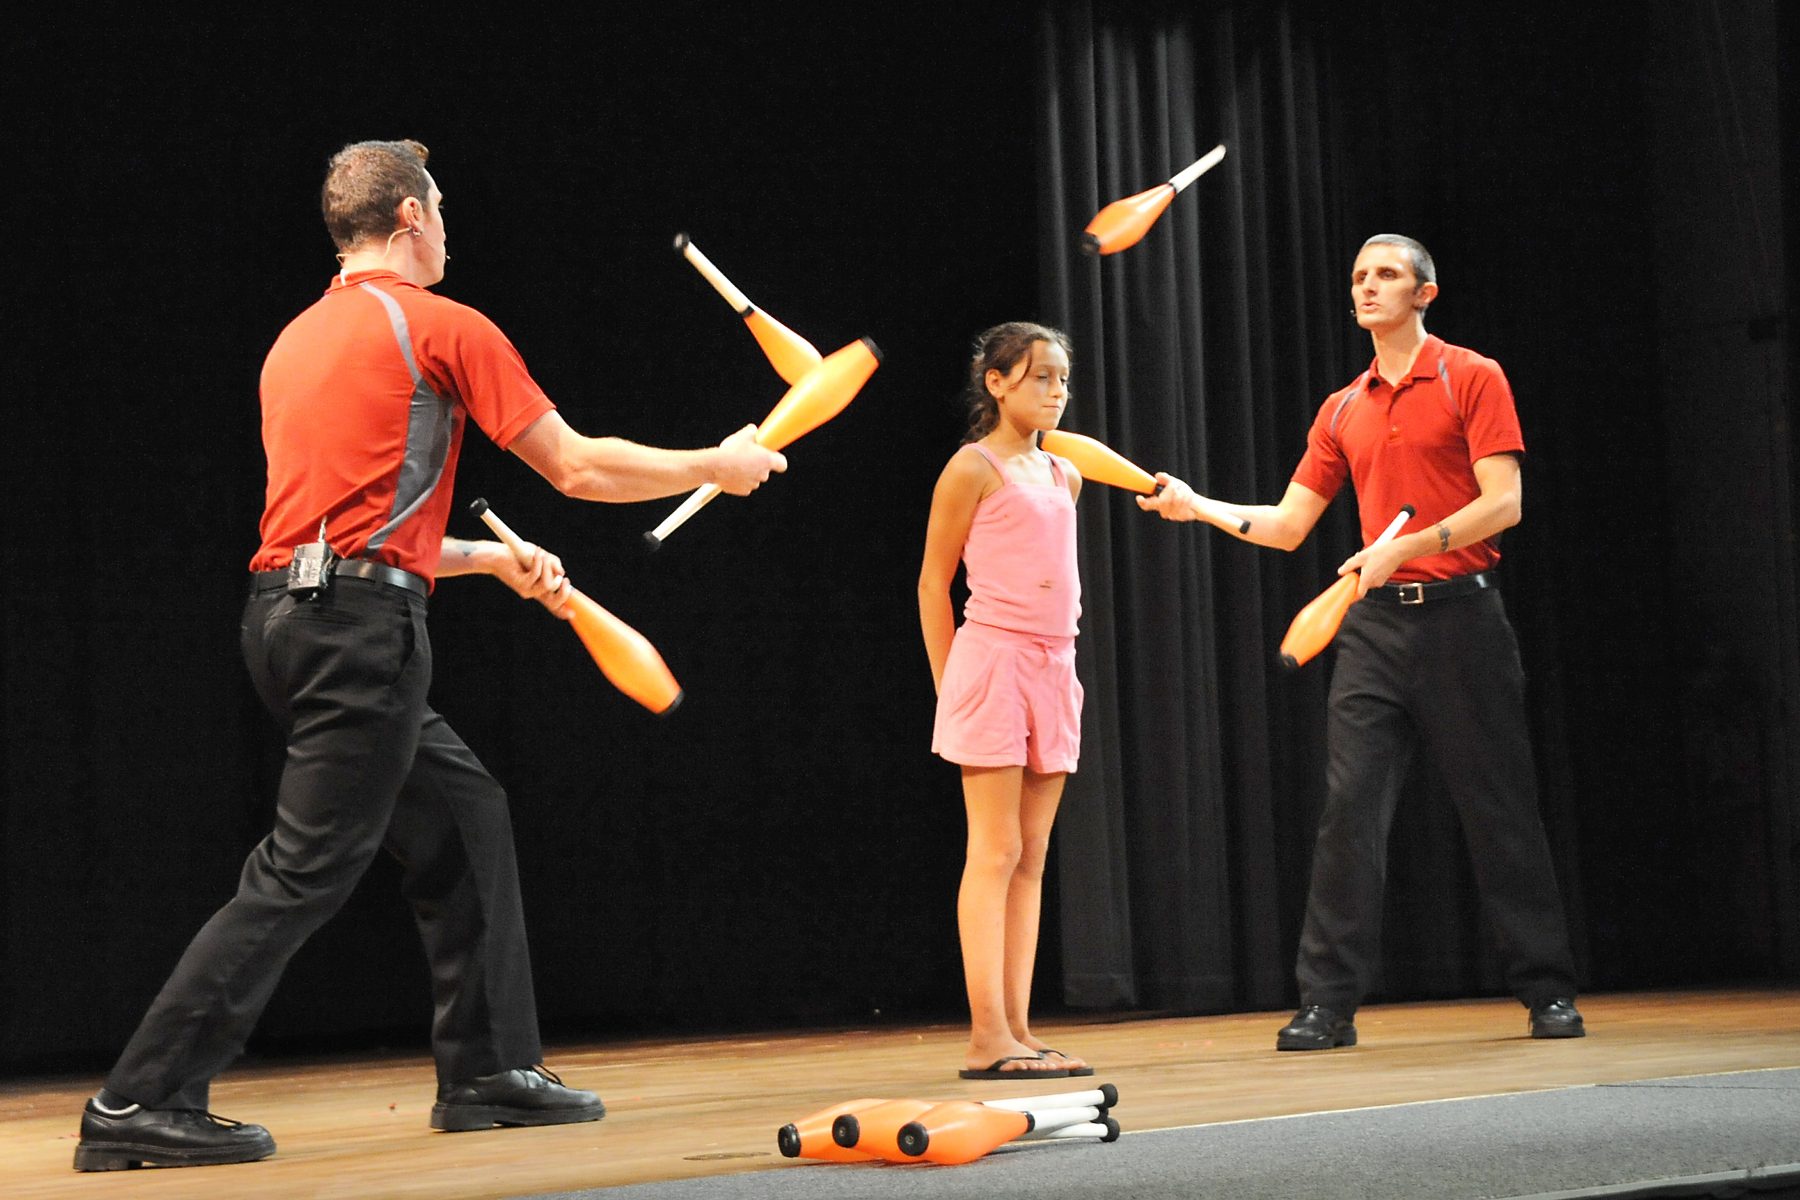 Are you daring enough to be in the middle of a juggling act?